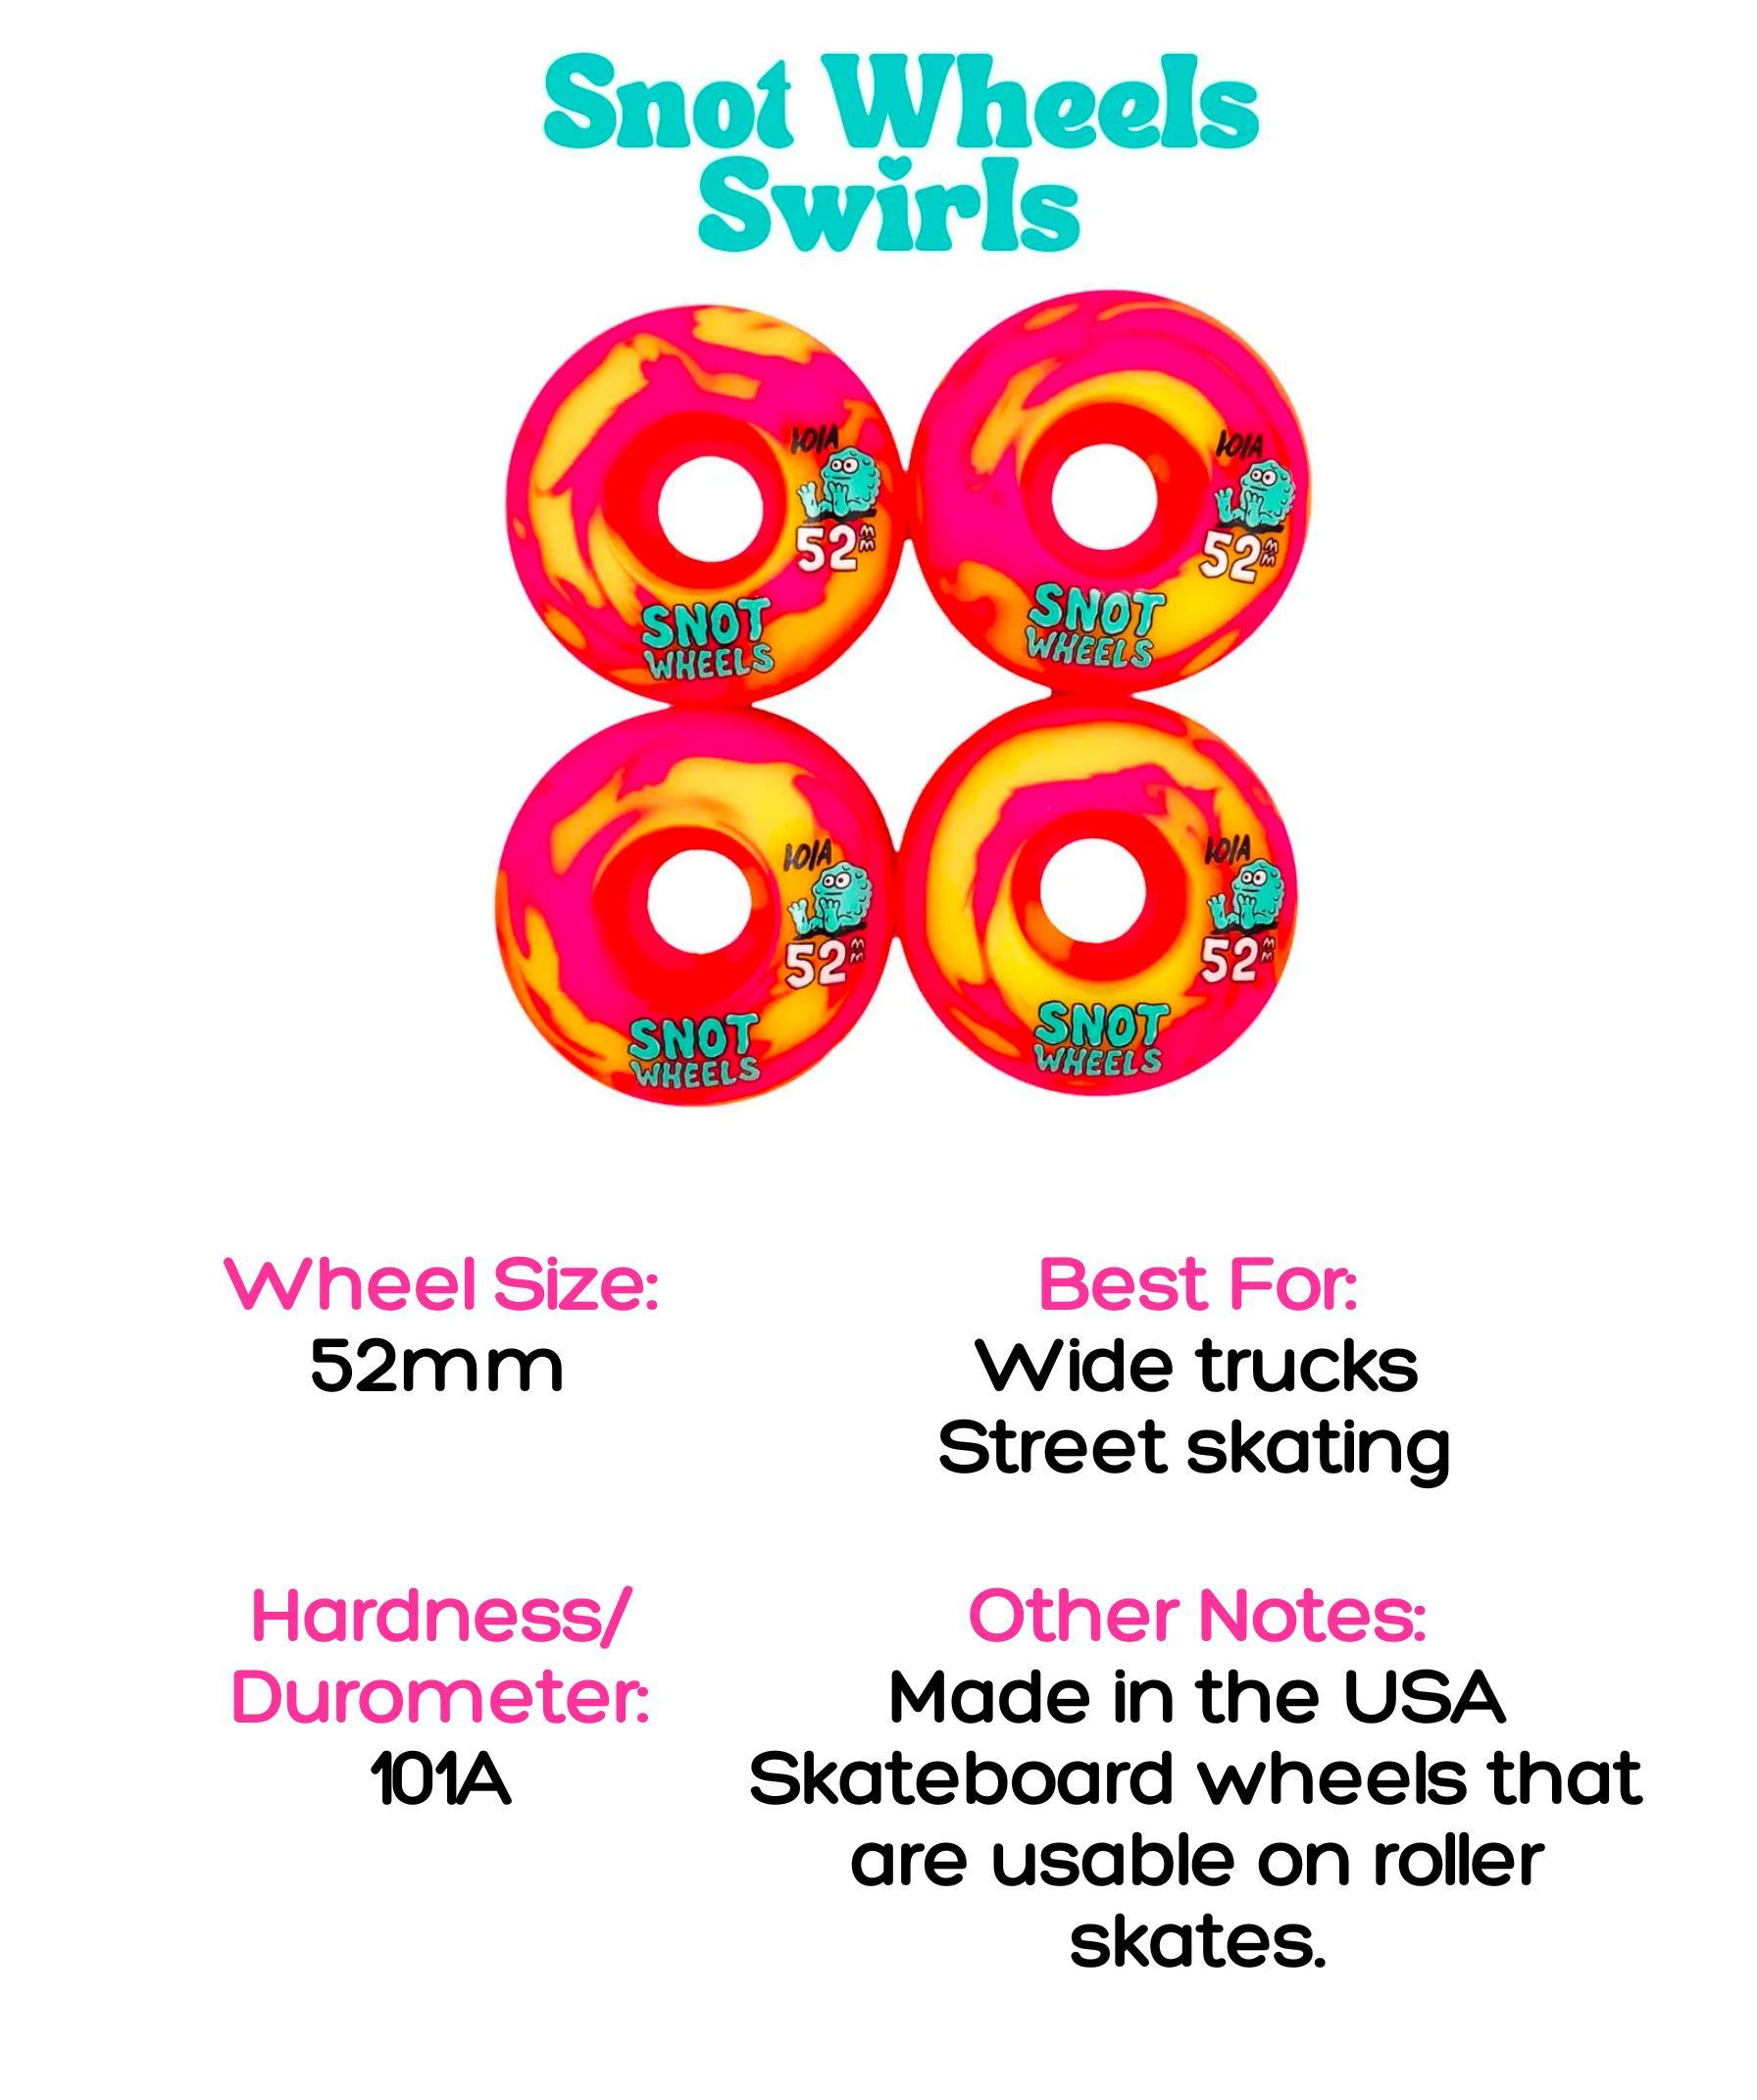 snot wheels swirls, 52mm wheel size, 101A hardness, best for wide trucks and street skating, made in the usa, skateboard wheels that are usable on roller skates